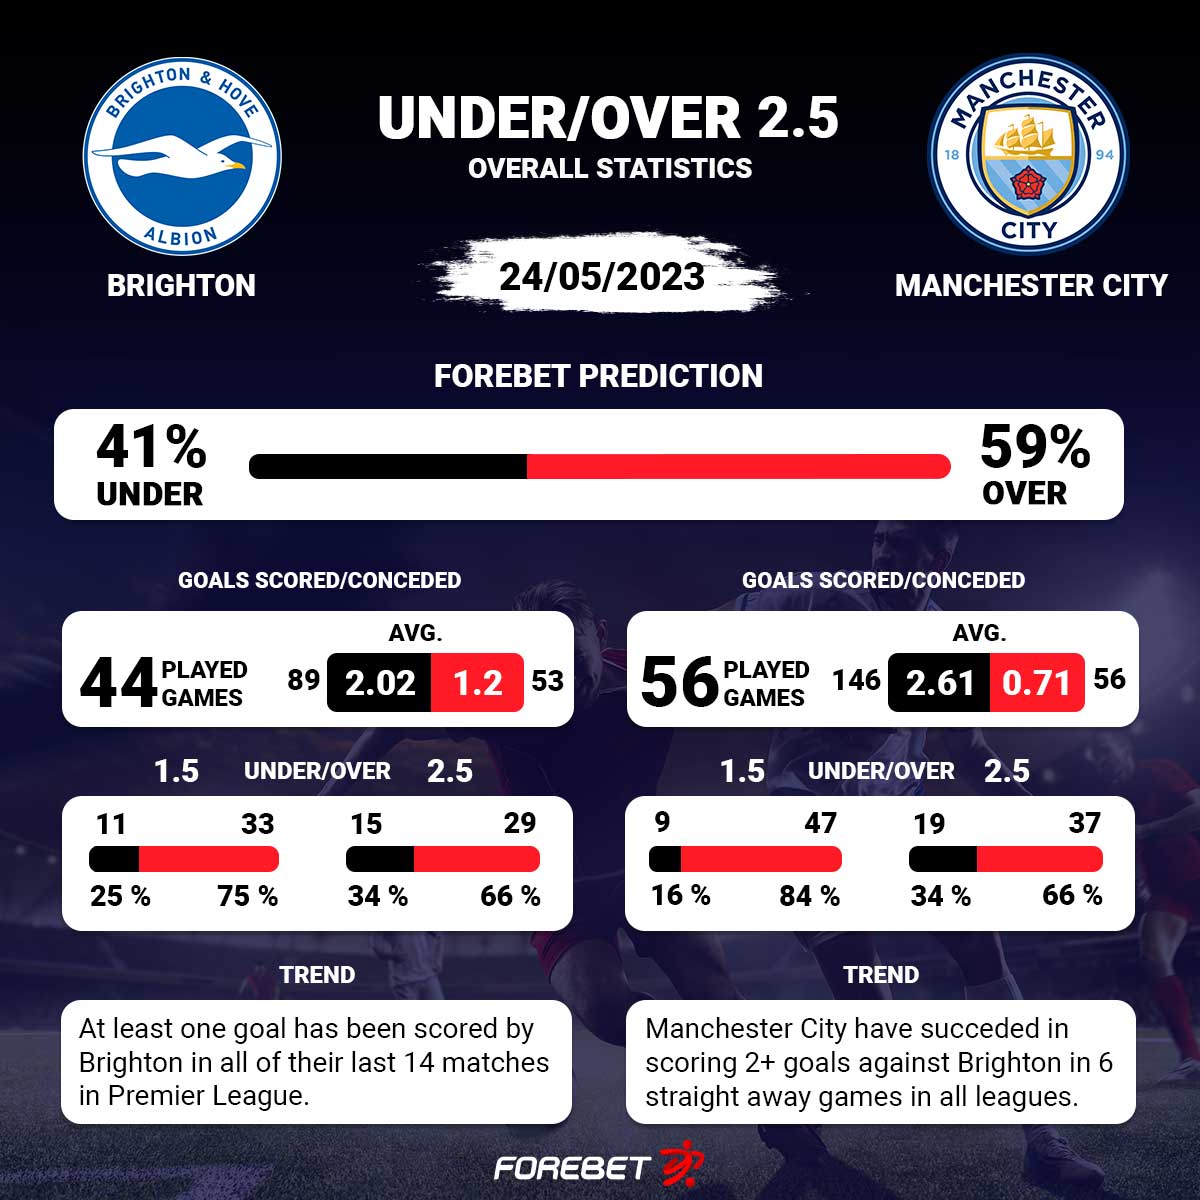 There have been over 2.5 goals in the last 4 matches between Brighton and Manchester City.

📊 More predictions, stats and trends: bit.ly/420fveb

#PL #BHAMCI #forebet